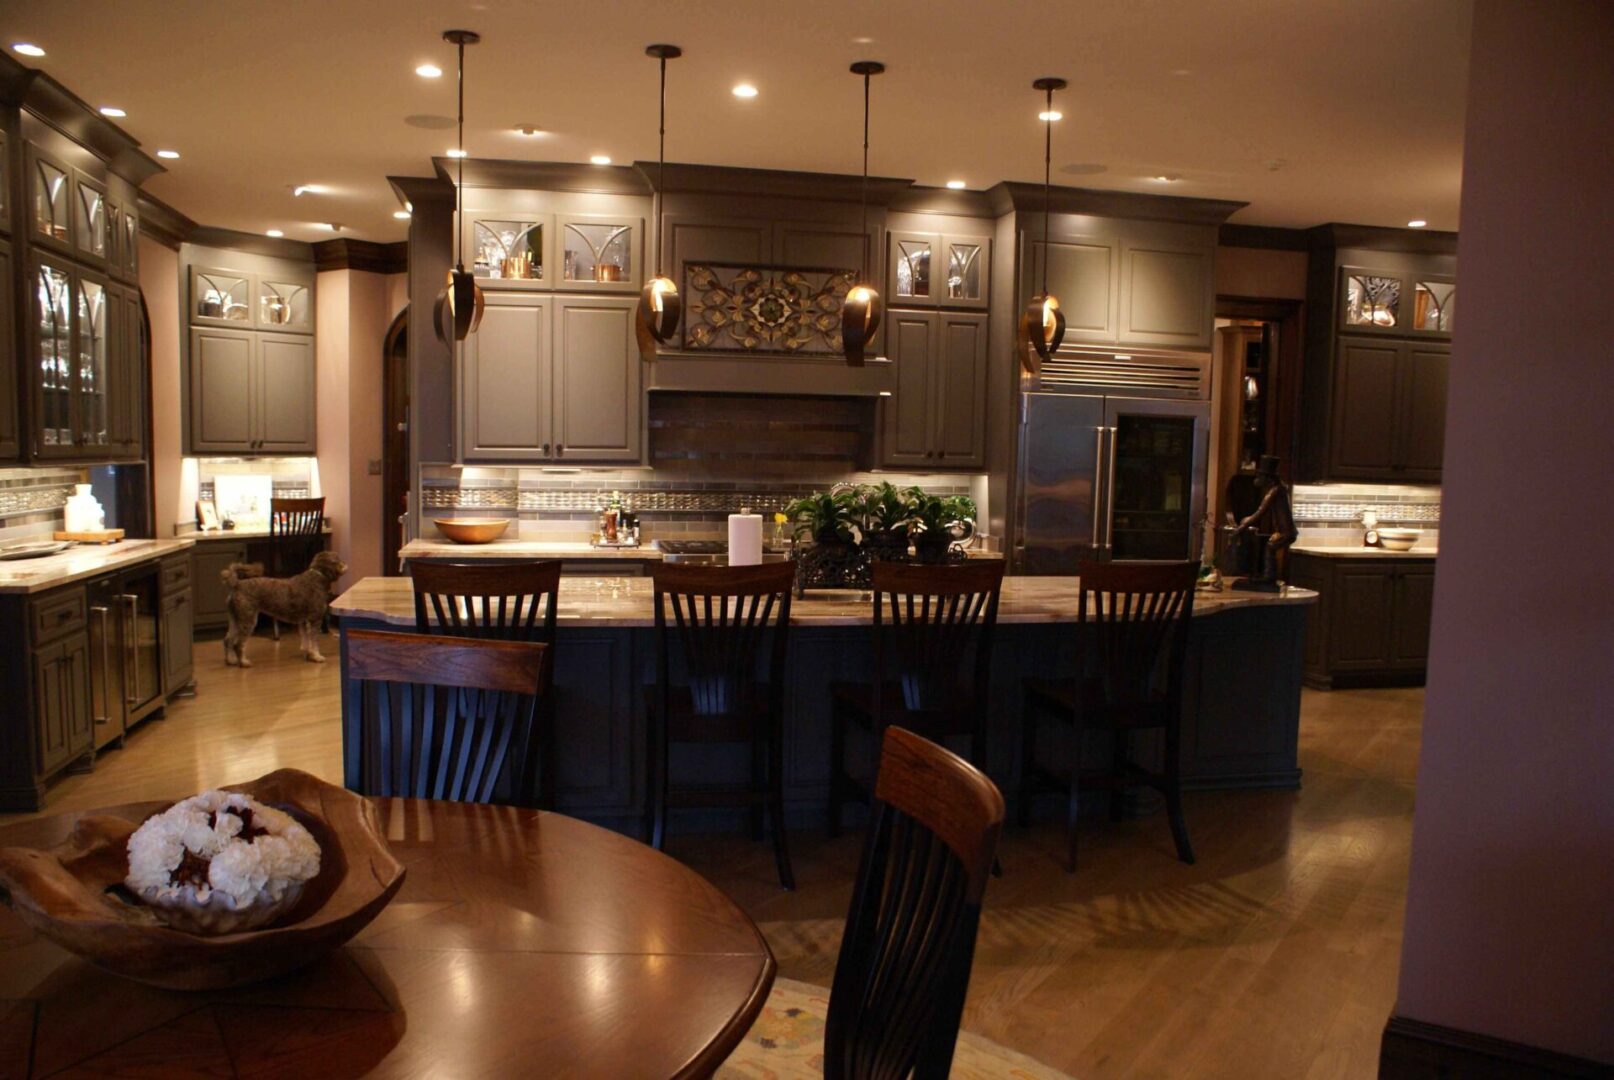 A kitchen with a large island and wooden chairs.